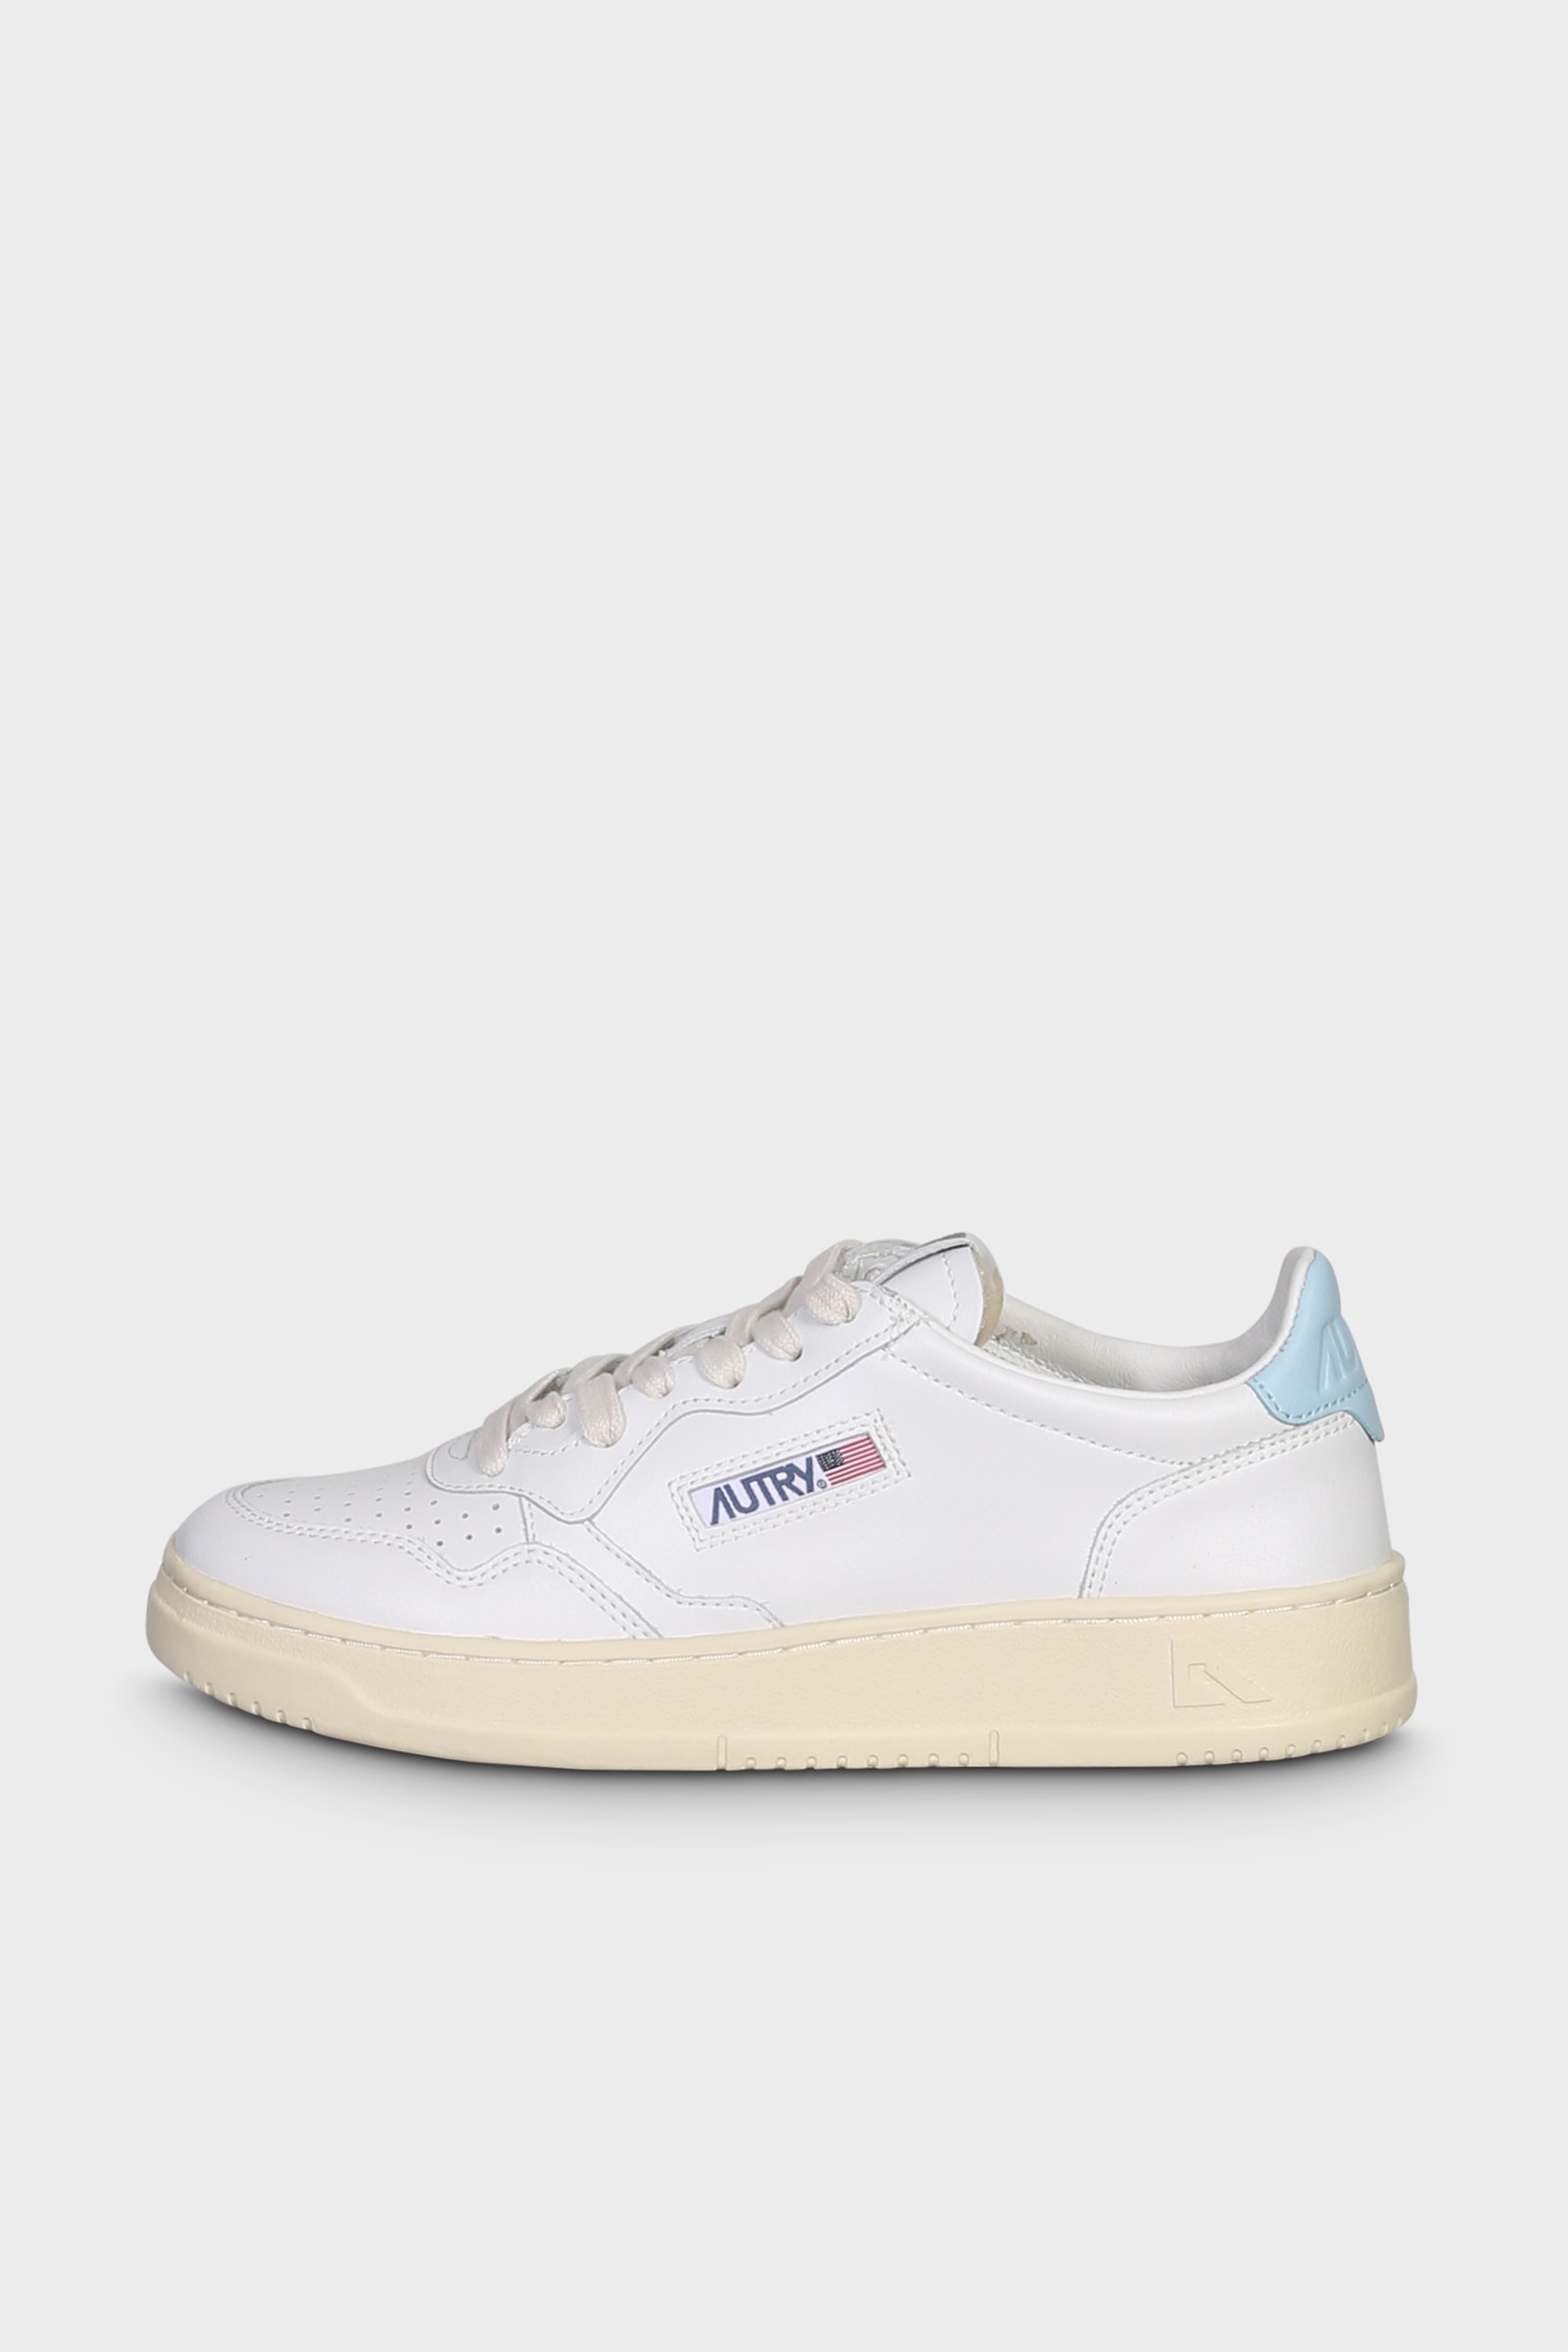 AUTRY ACTION SHOES Sneaker Low in White/Stream Blue